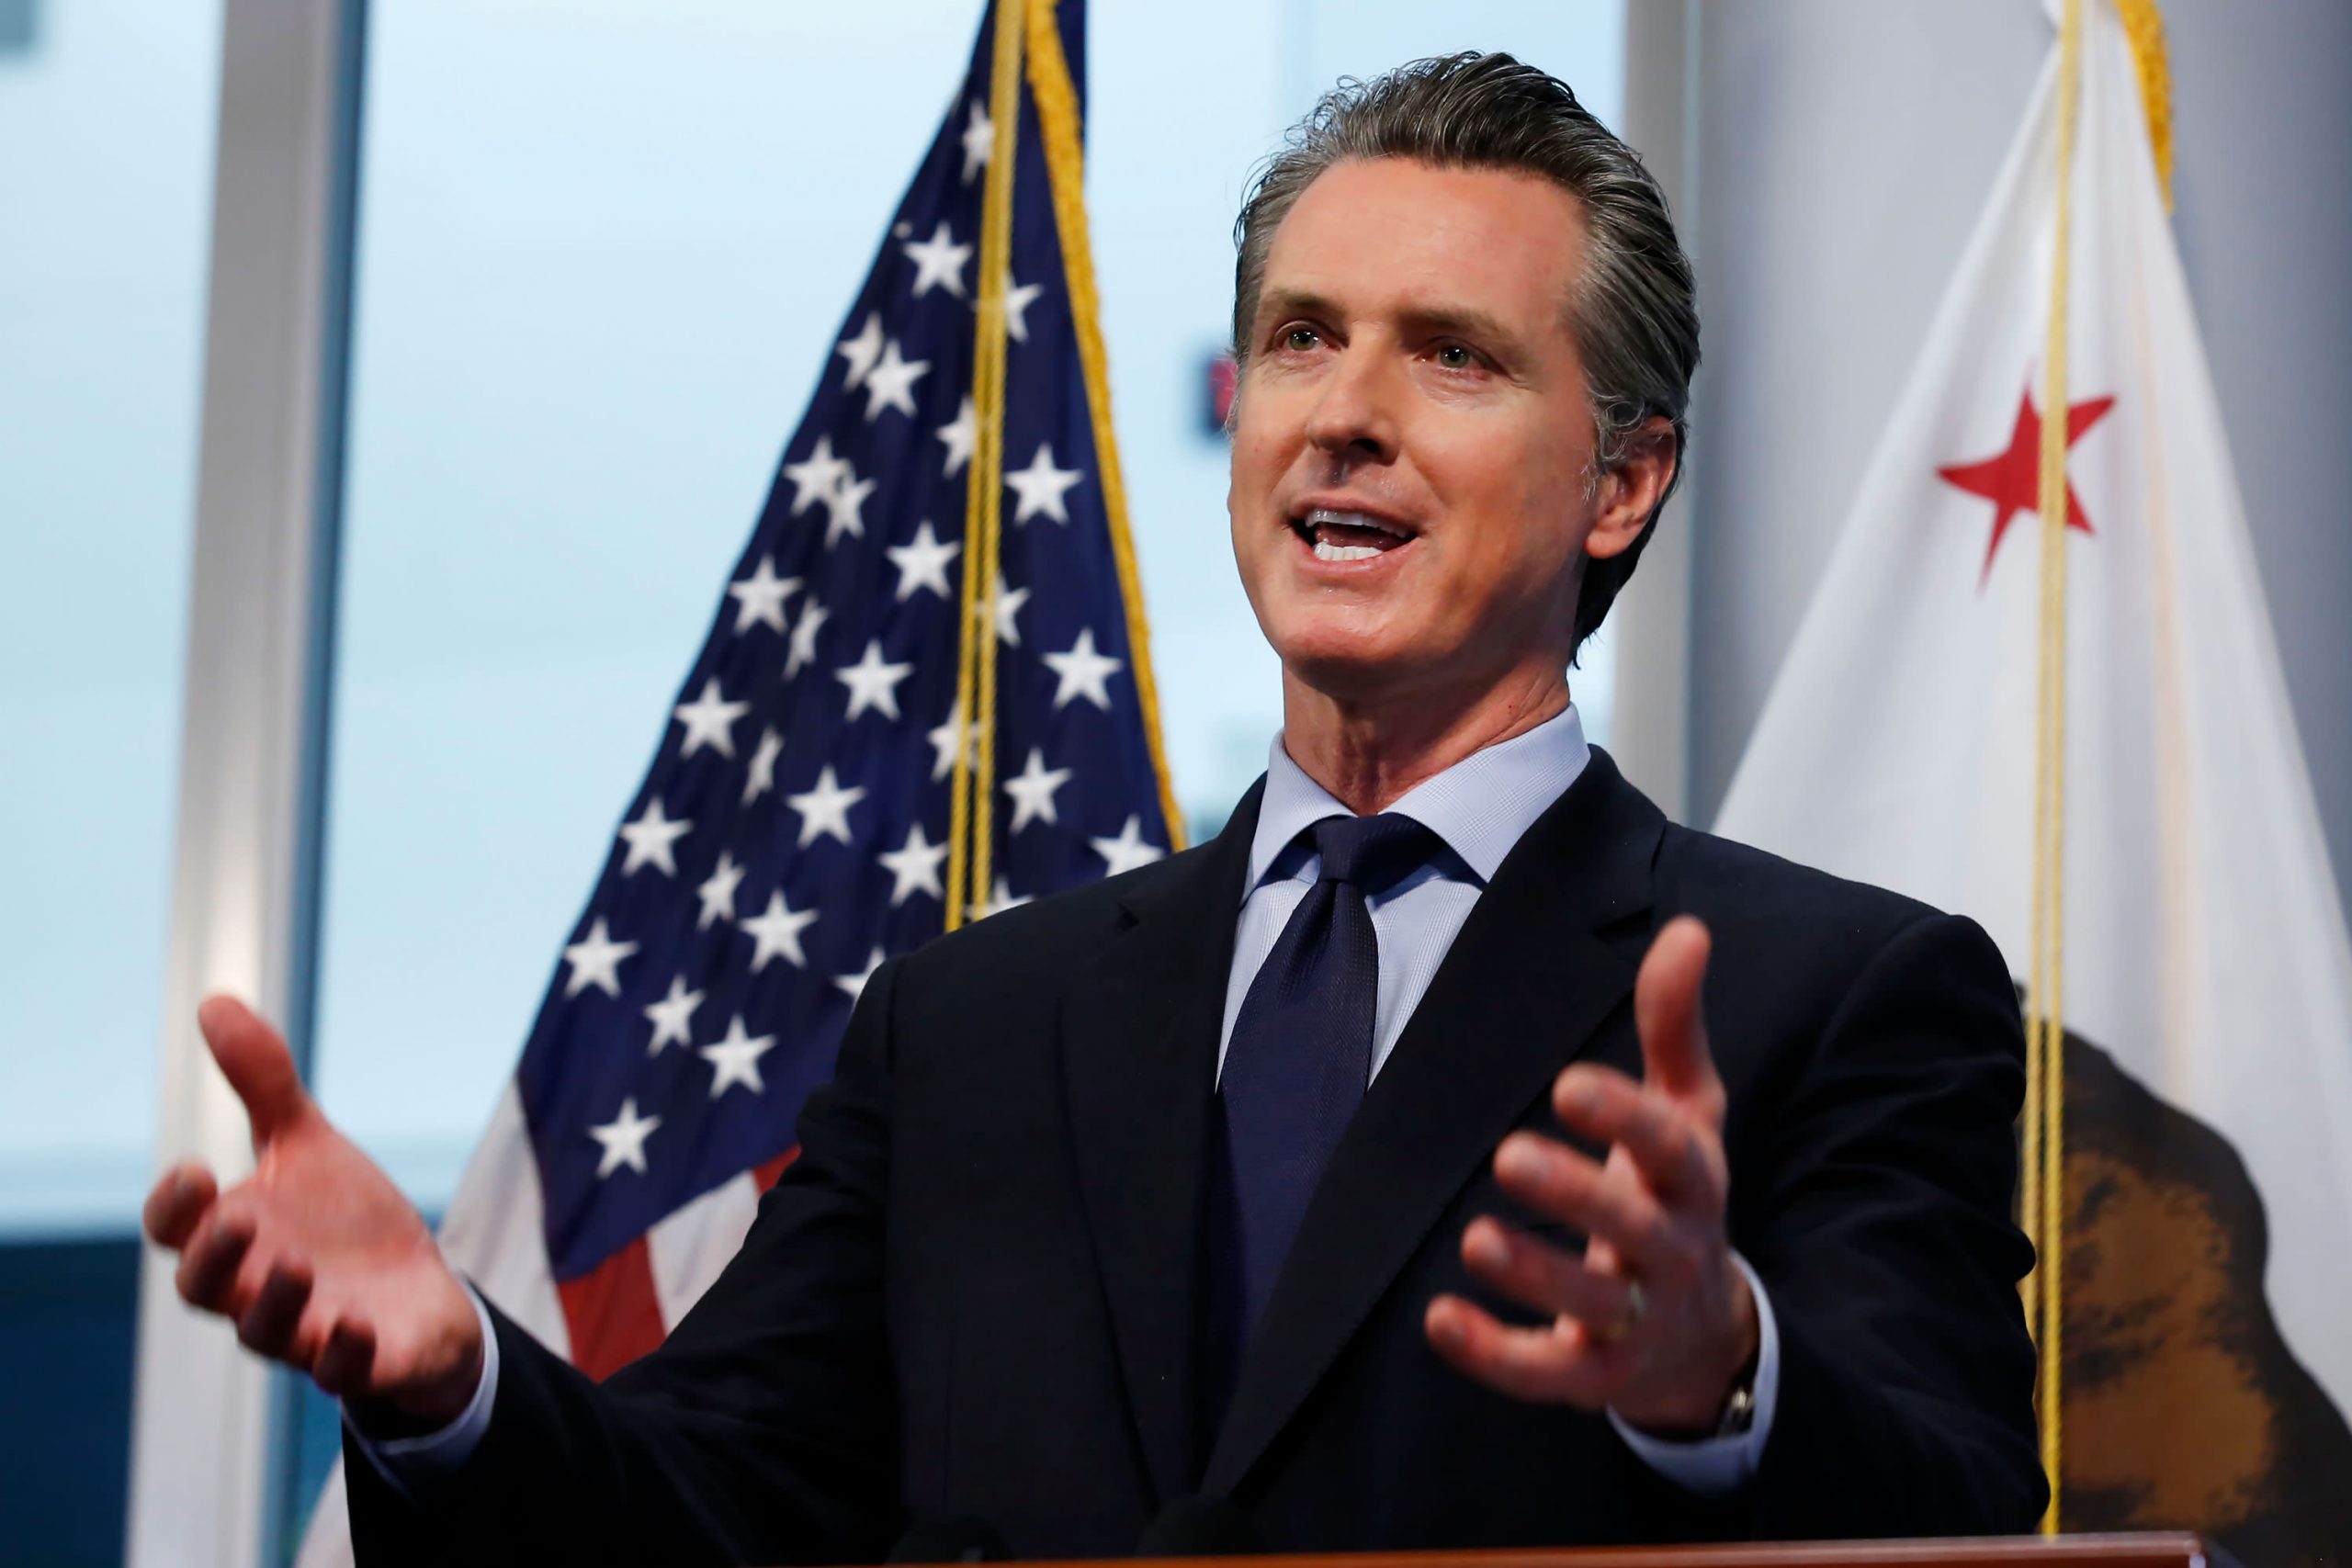 Newsom to impose regional stay-at-home order to ease hospitalizations